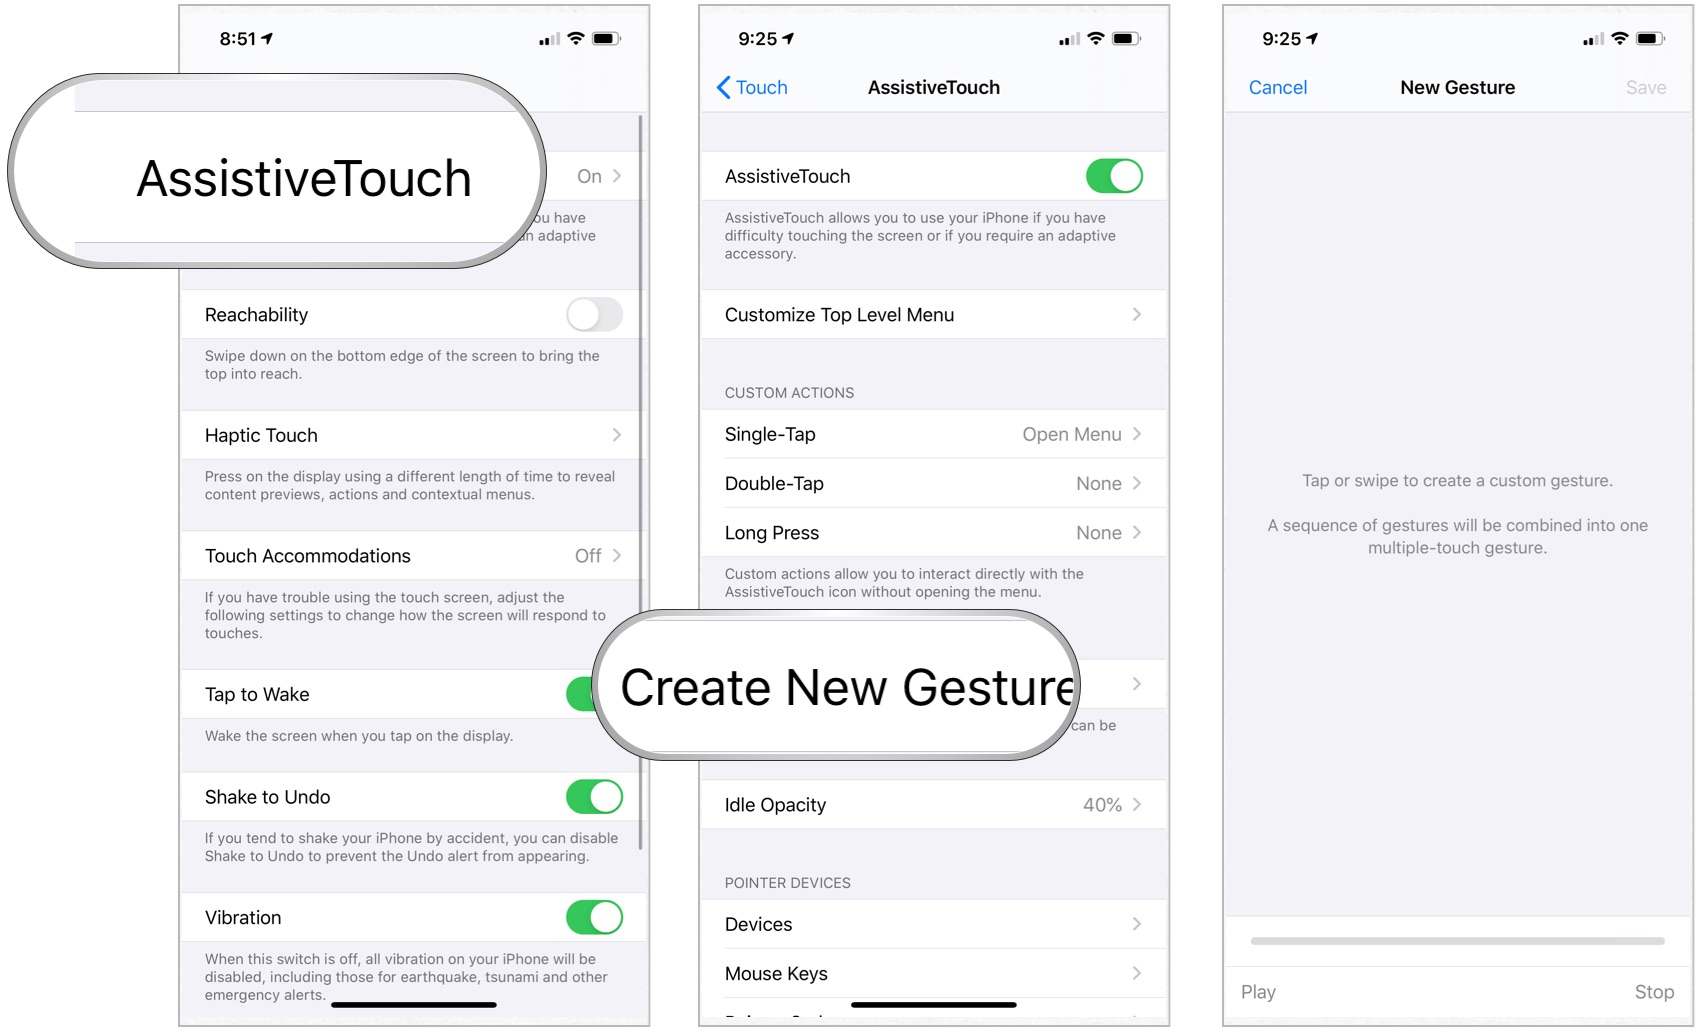 To add custom gestures, tap AssistiveTouch, then choose Create New Gesture.